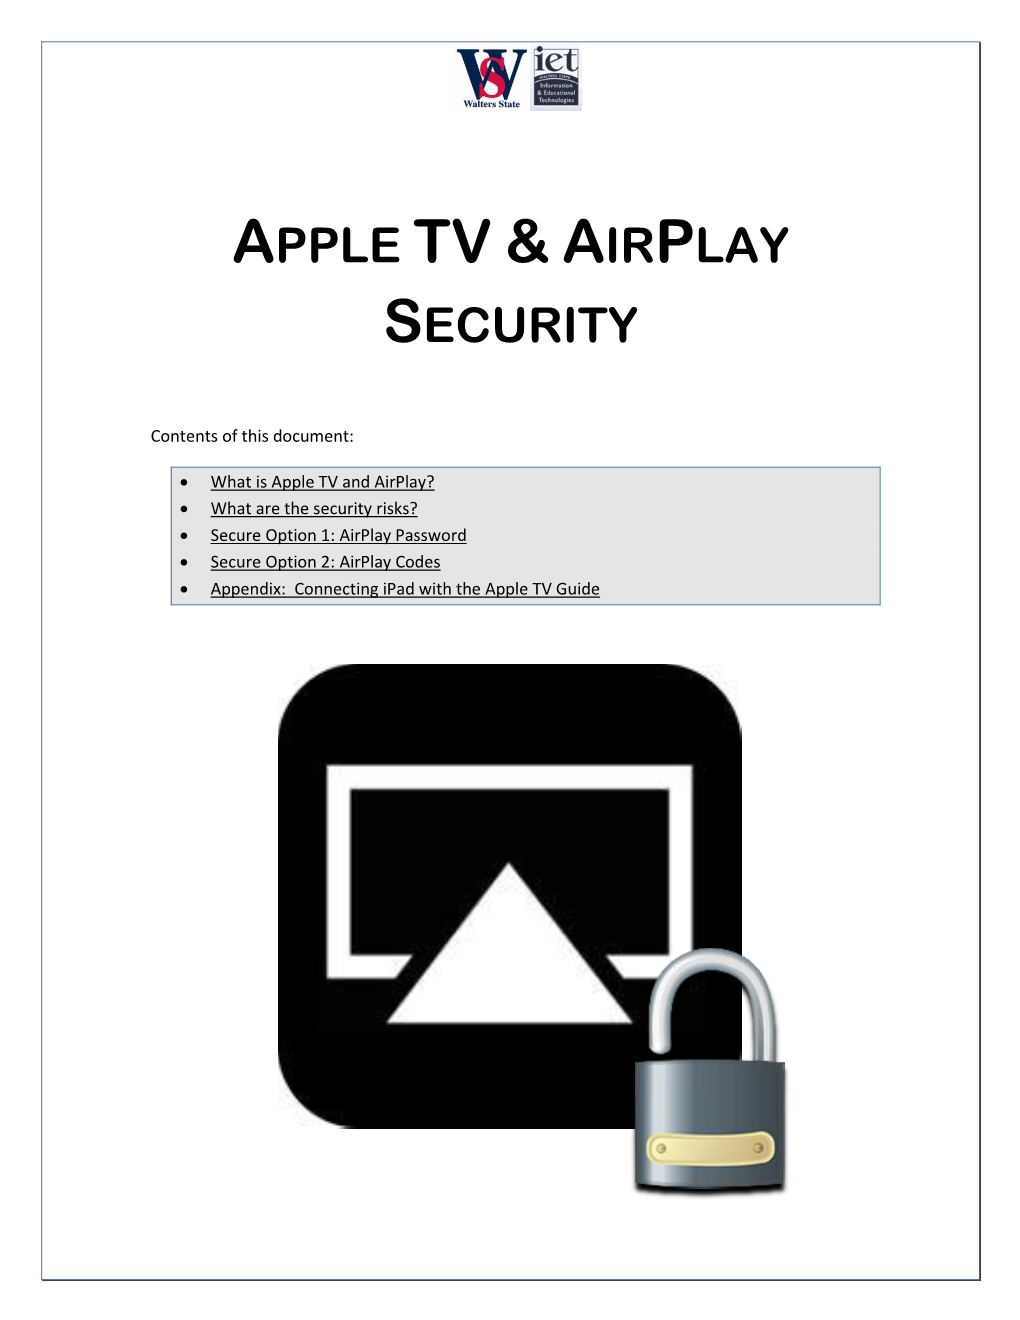 Apple TV & Airplay Security